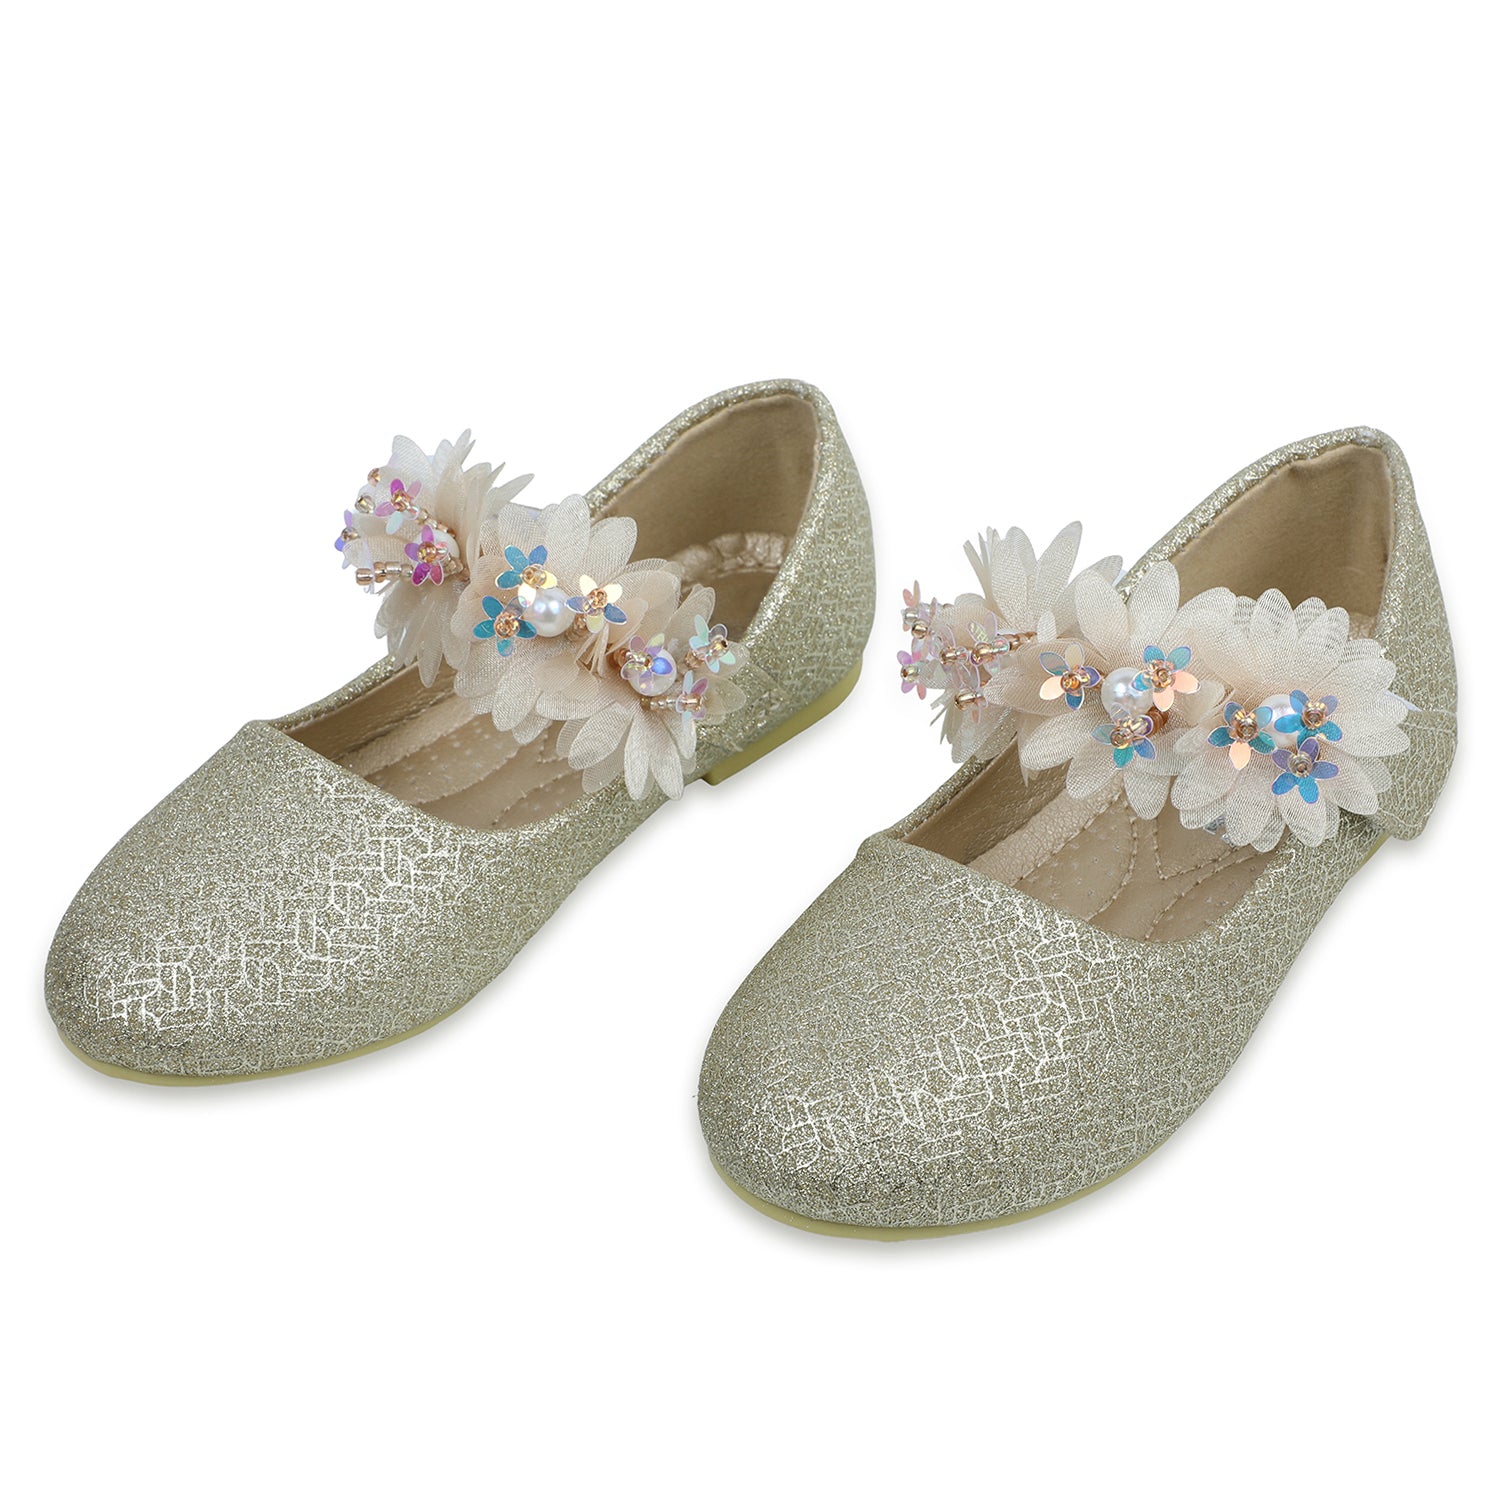 Baby Moo x Bash Kids Shiny Floral Applique Mary Jane Ballerinas - Gold